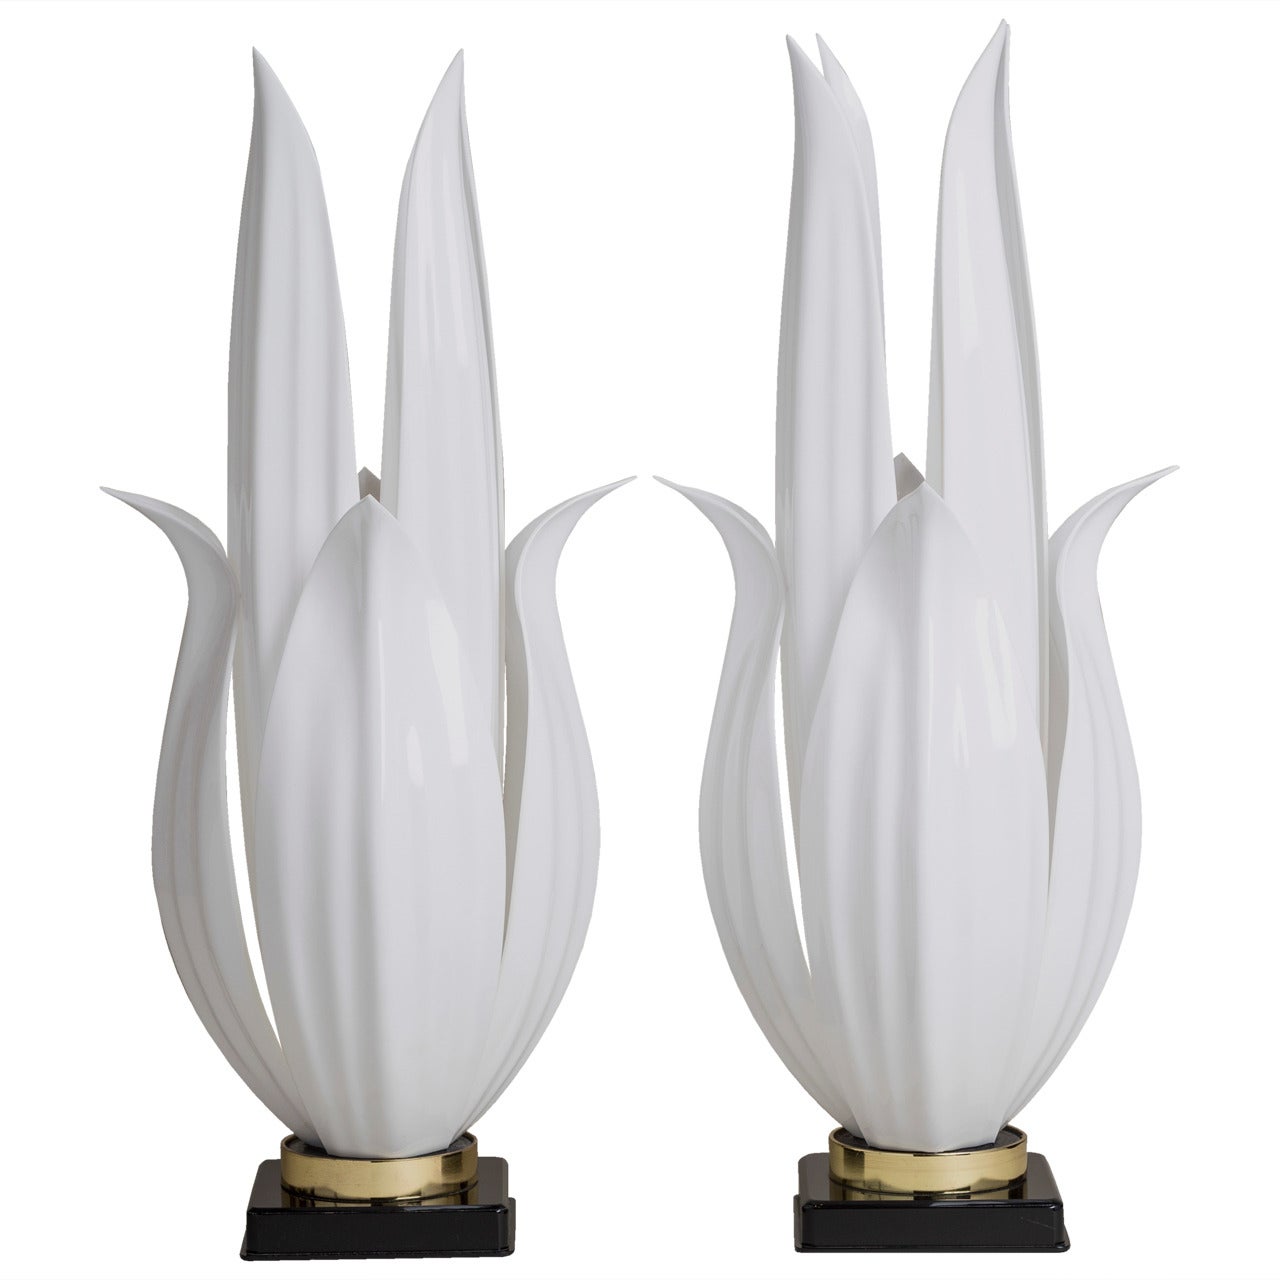 Pair of Spiked Rougier Designed Table Lamps, Canada, Late 1970s